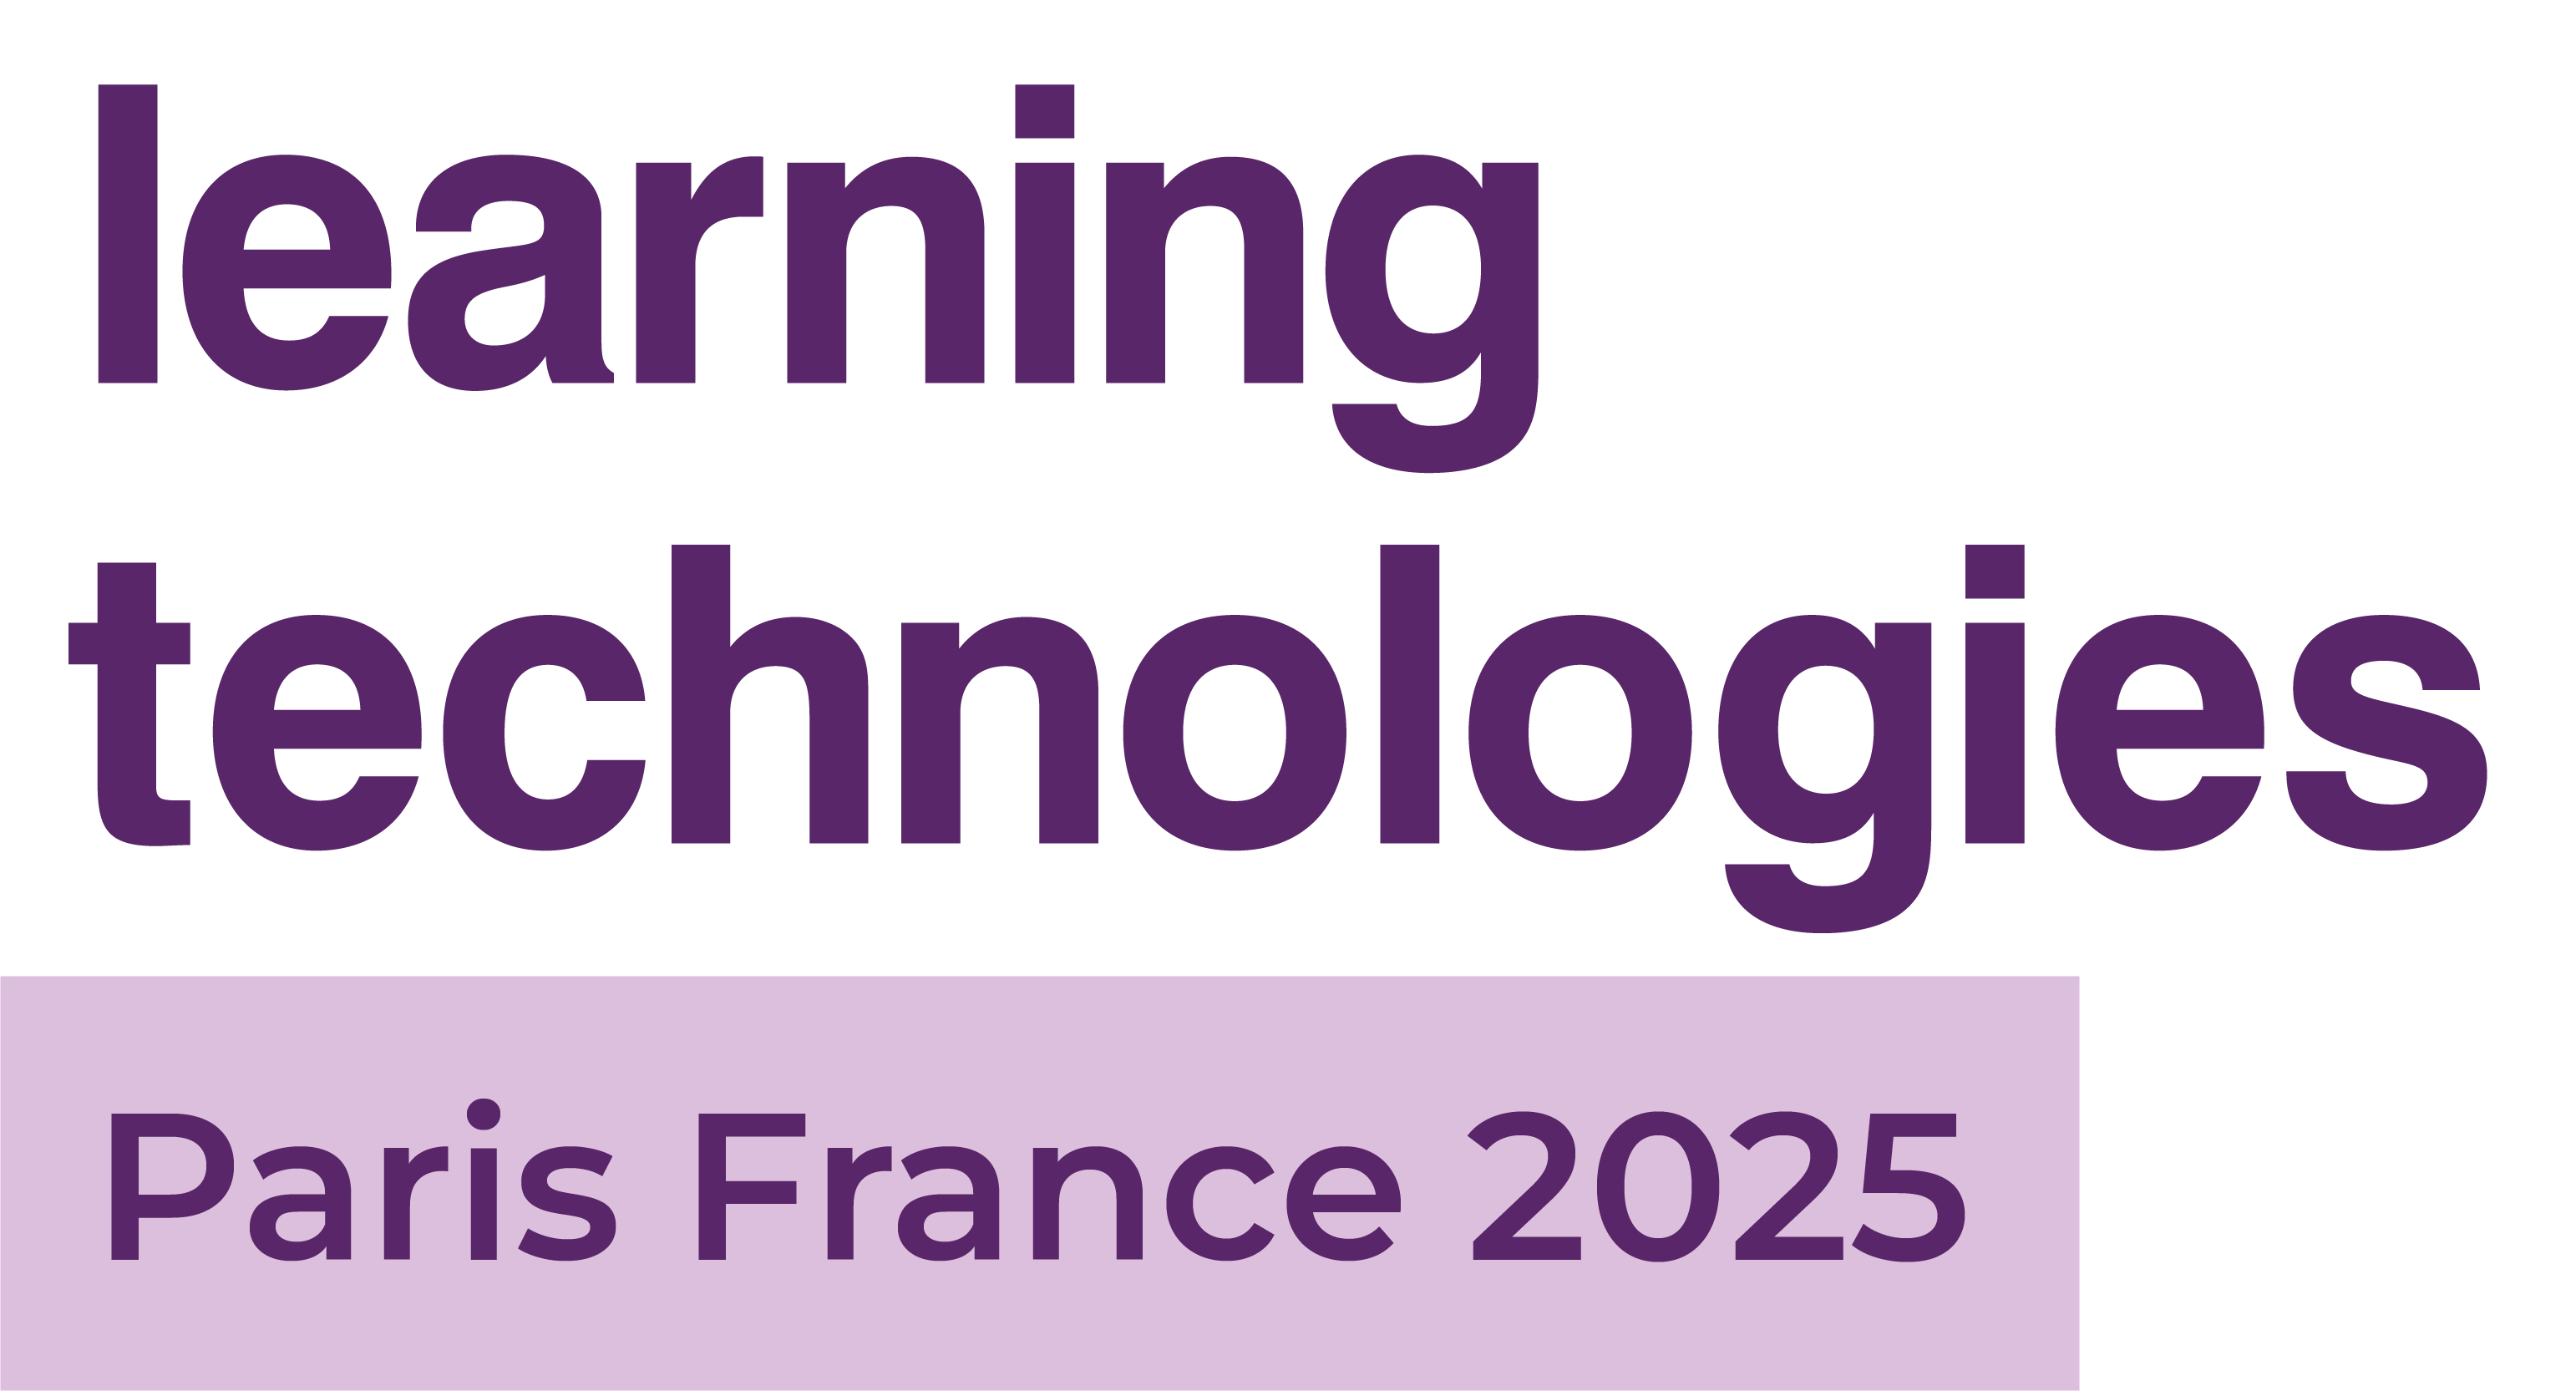 Learning Technologies France 2024